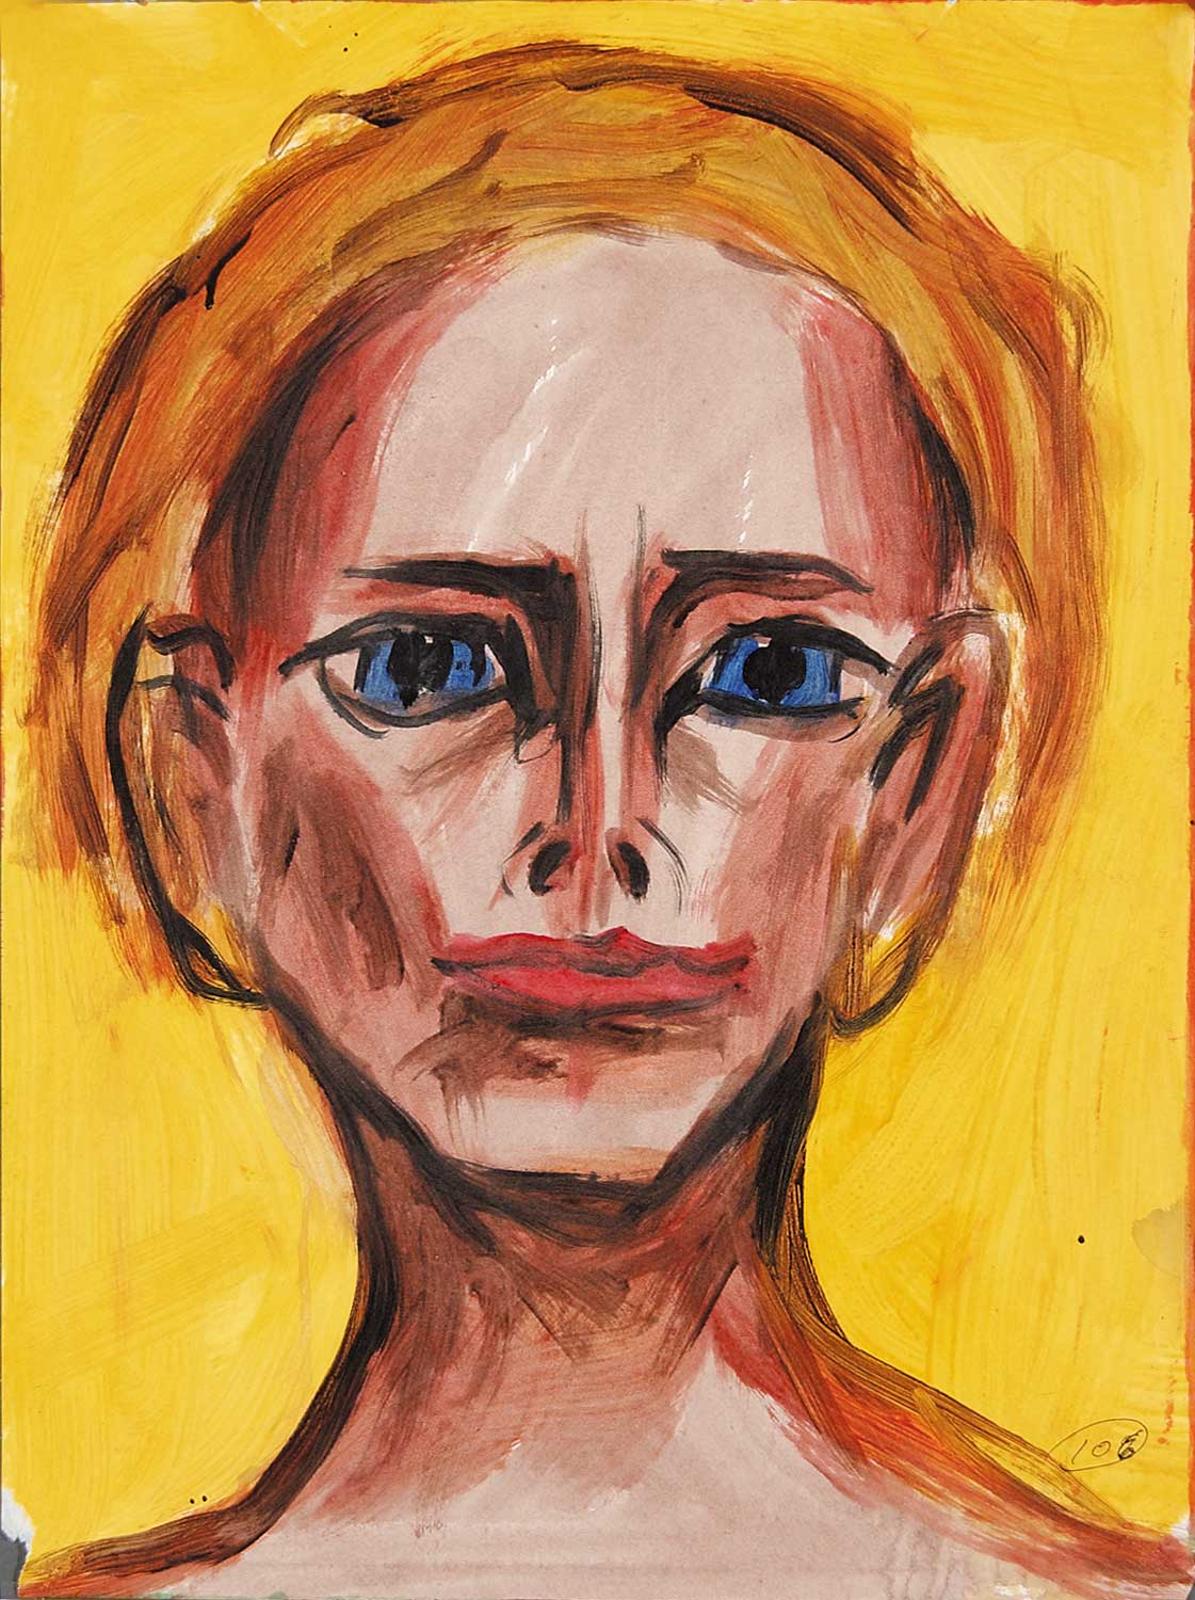 Robert Charles Aller (1922-2008) - Untitled - Portrait of Boy on Yellow Background